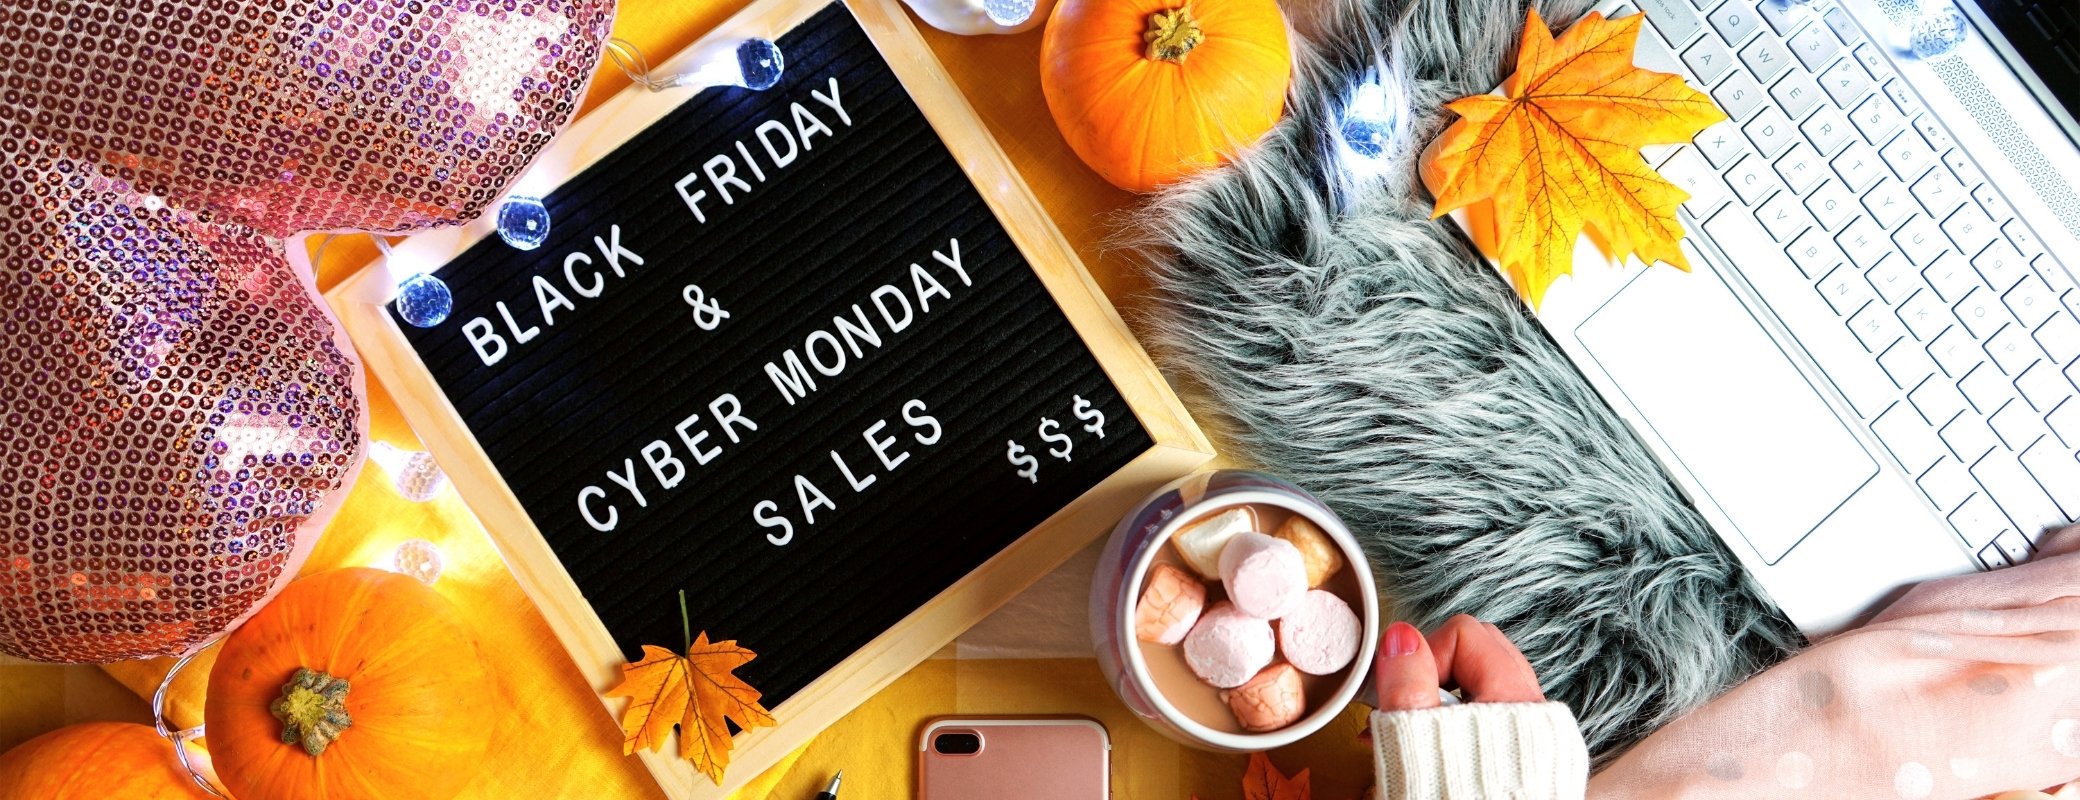 Are You Prepared For Black Friday And Cyber Monday